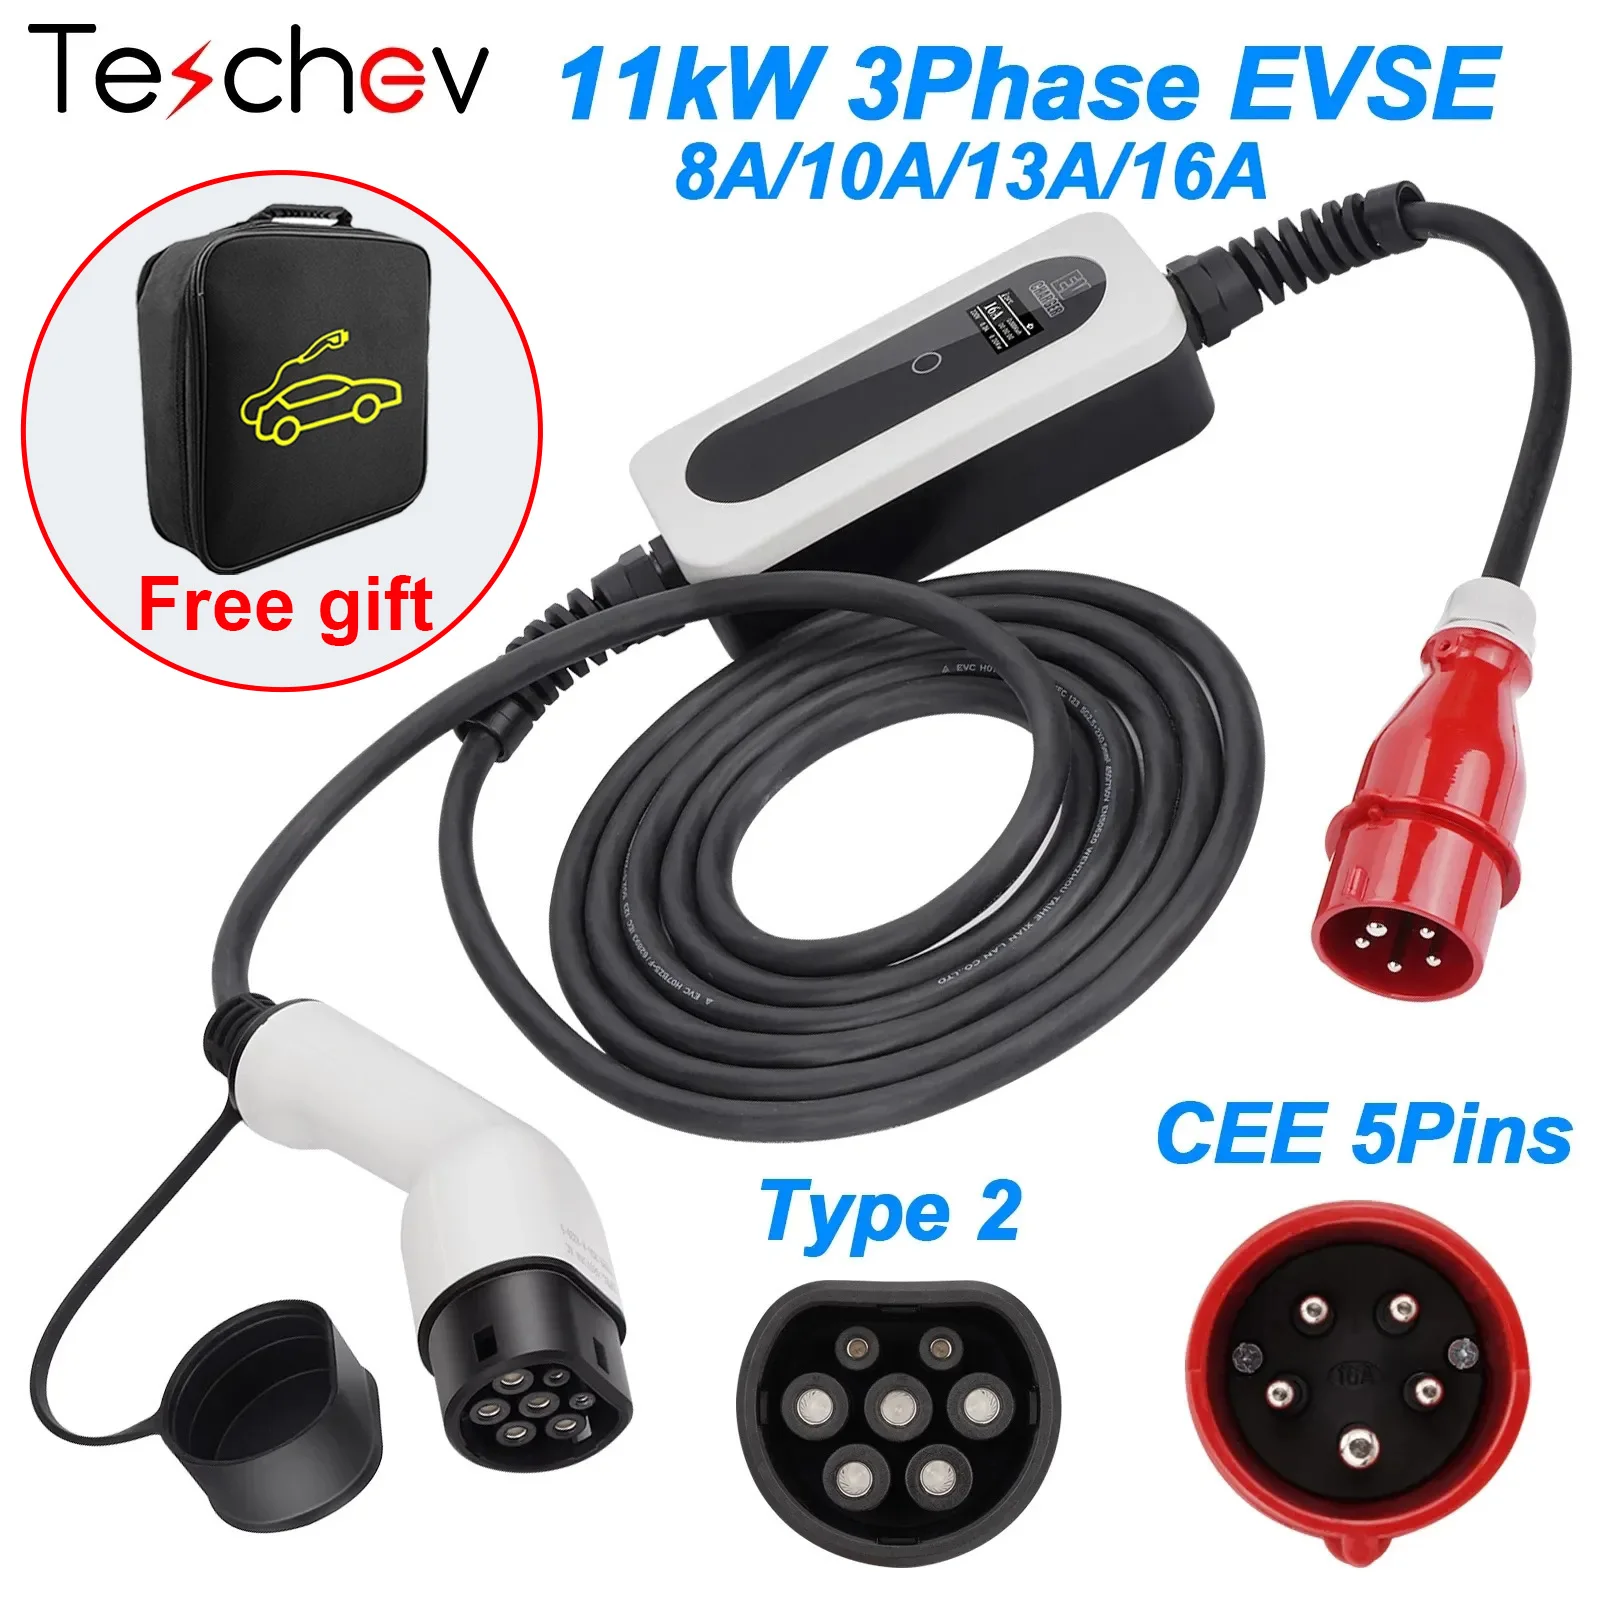 

Teschev 11kw Ev Charger Type2 3 Phase 16A IEC 62196 CEE Red Plug Portable Charger Fast Charging EVSE Electric Vehicles Cable